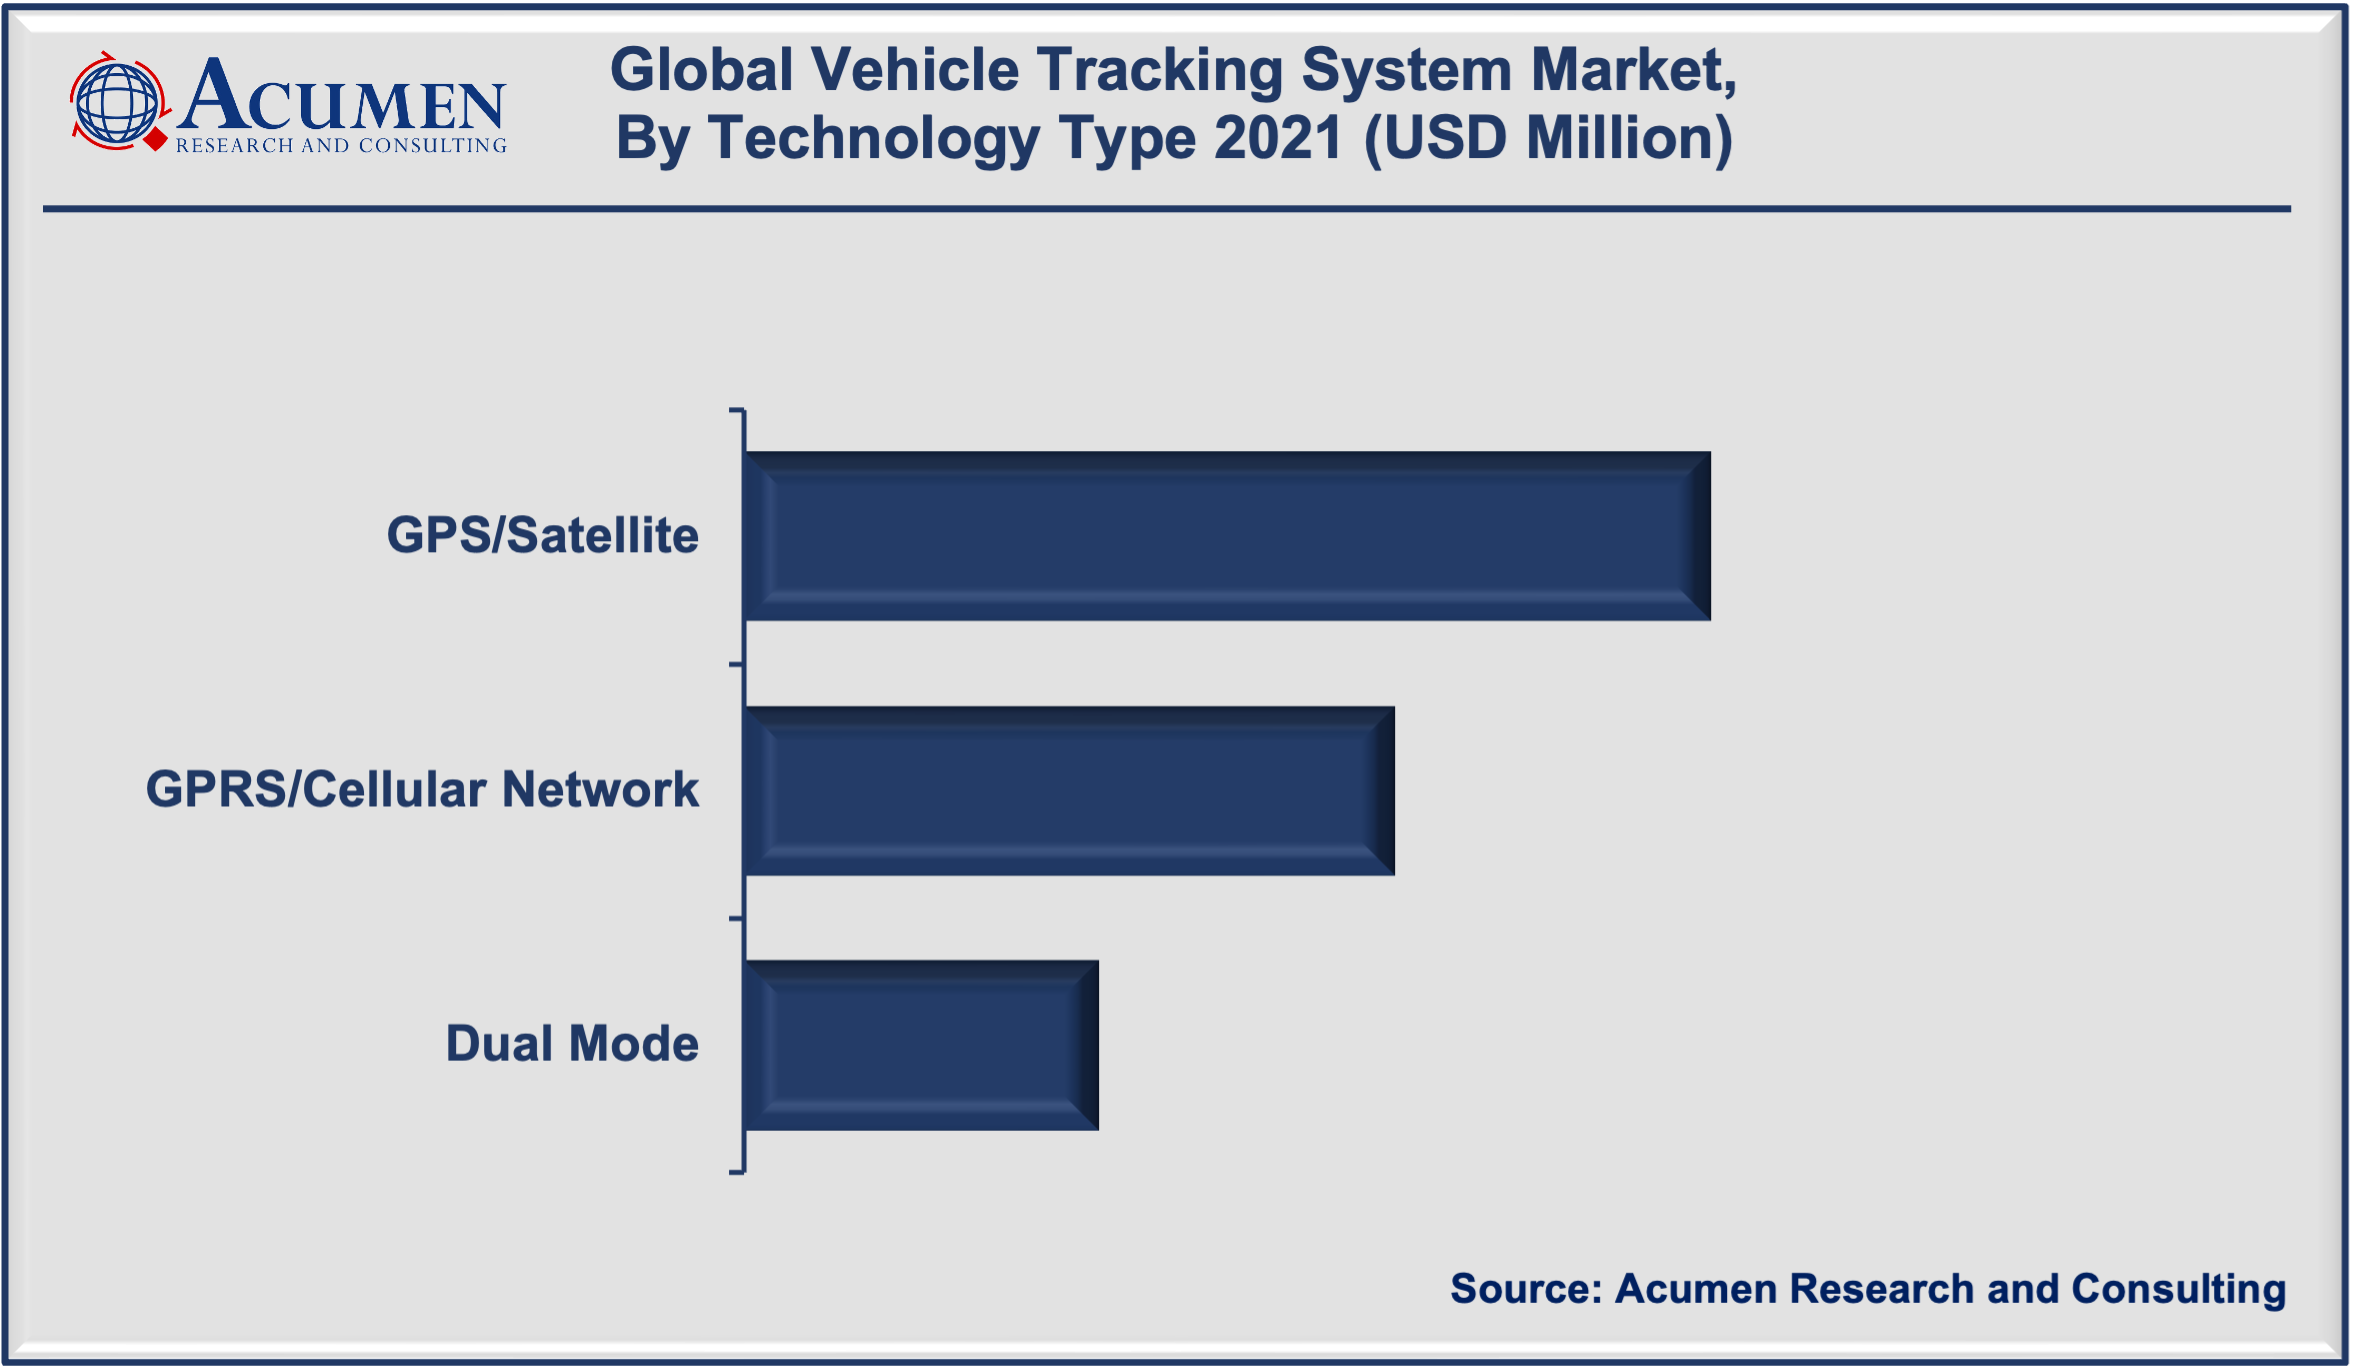 Vehicle Tracking System Market Analysis accounted for USD 19,453 Million in 2021 and is expected to reach the value of USD 59,454 Million by 2030 growing at a CAGR of 13.7% during the forecast period from 2022 to 2030.